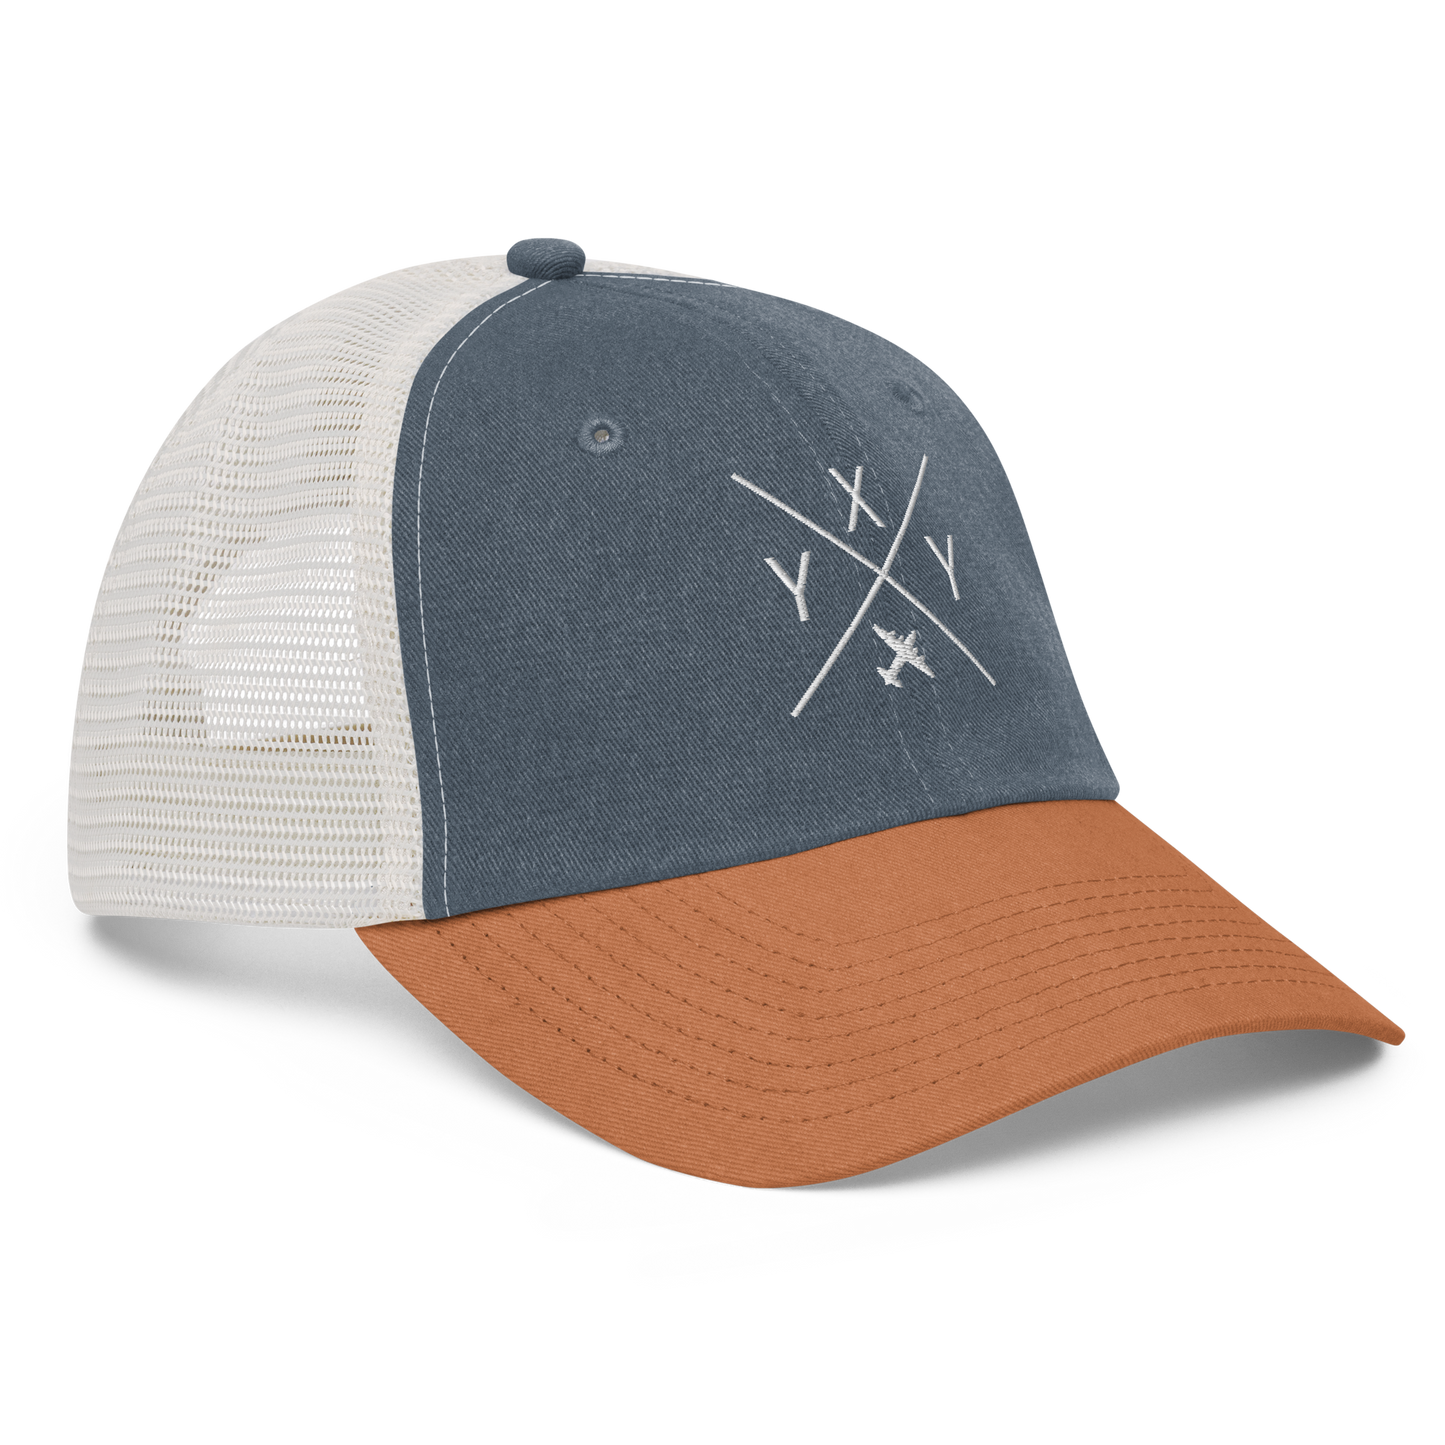 Crossed-X Pigment-Dyed Trucker Cap • YXY Whitehorse • YHM Designs - Image 16